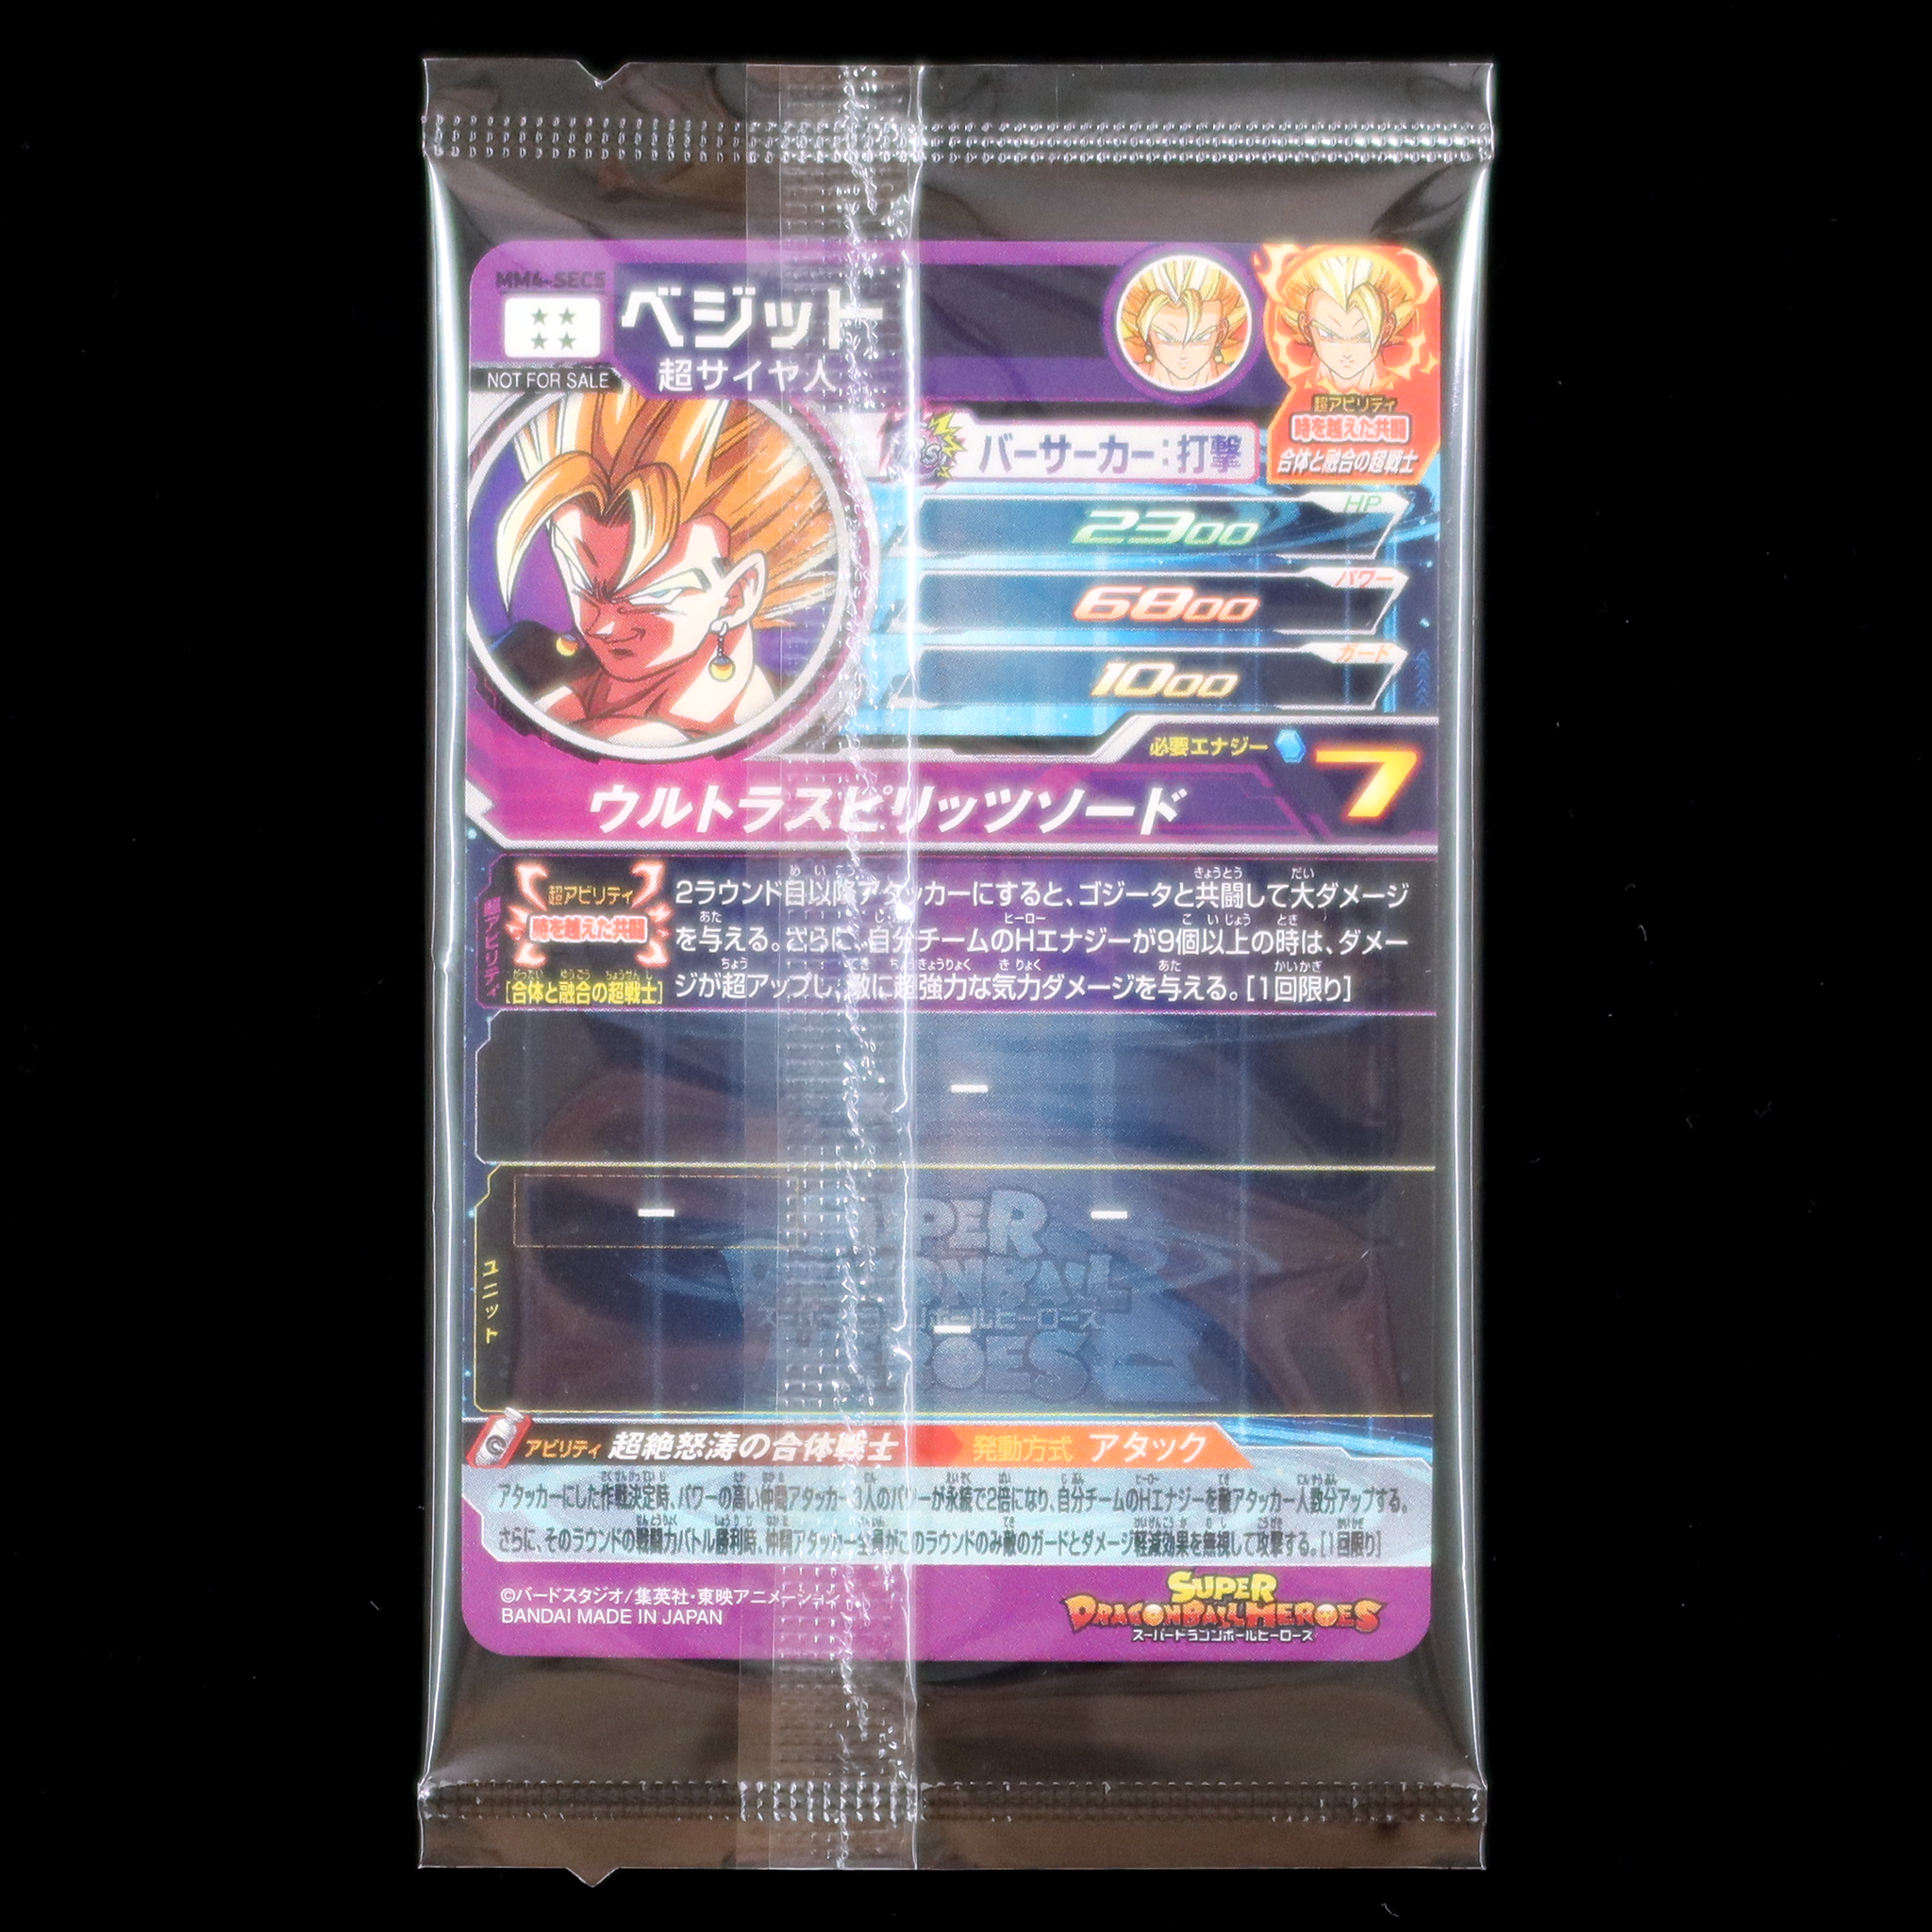 SUPER DRAGON BALL HEROES MM4-SEC5 in blister